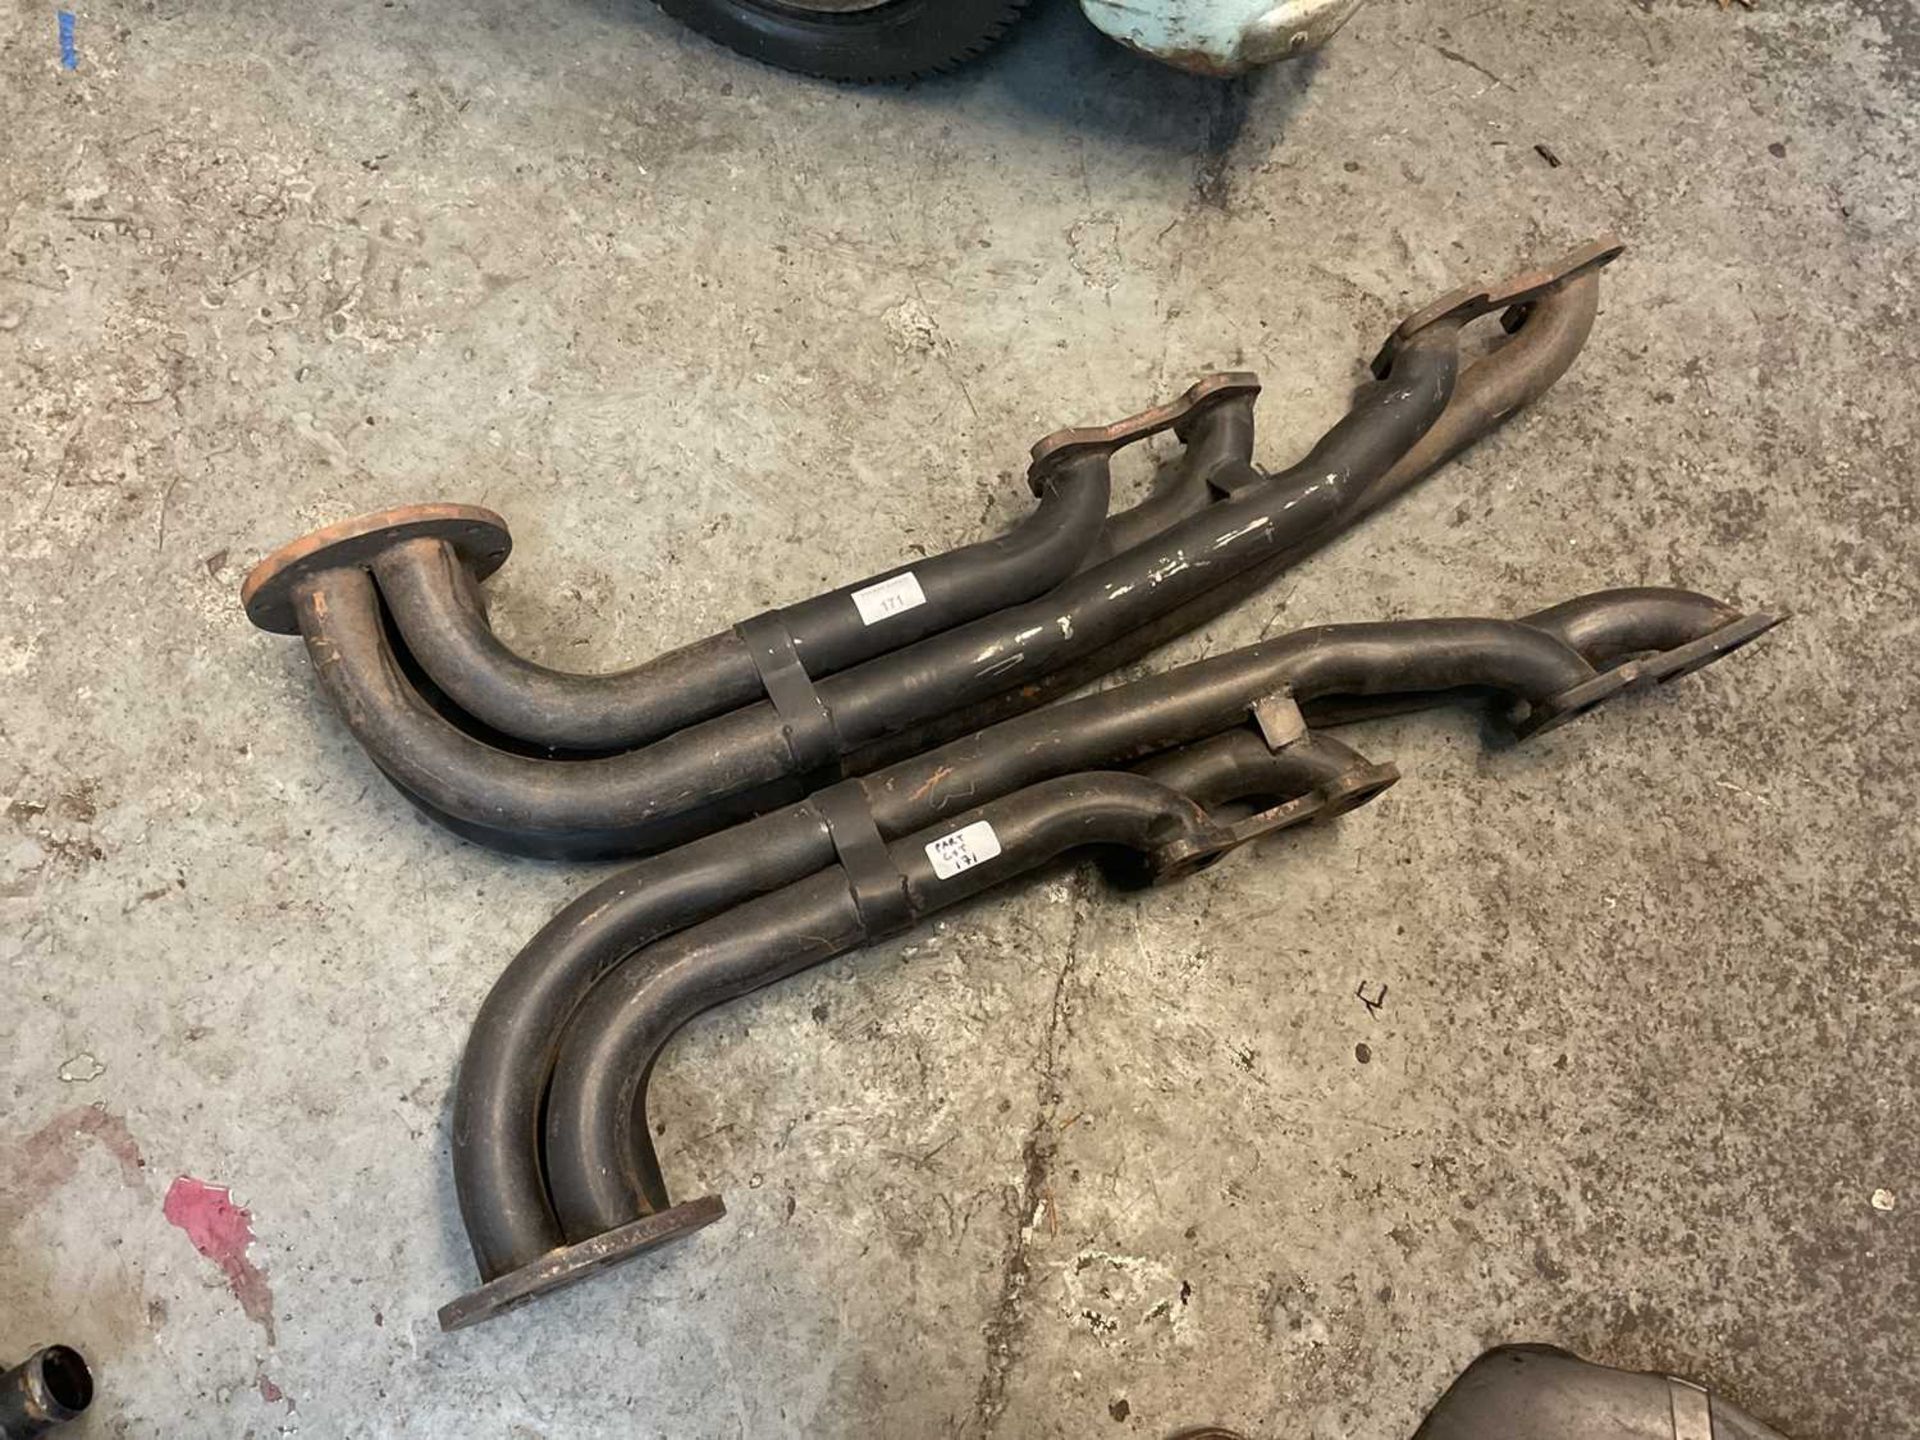 Pair of new old stock TVR exhaust manifolds believed to come from a Pre Cat Griffith.